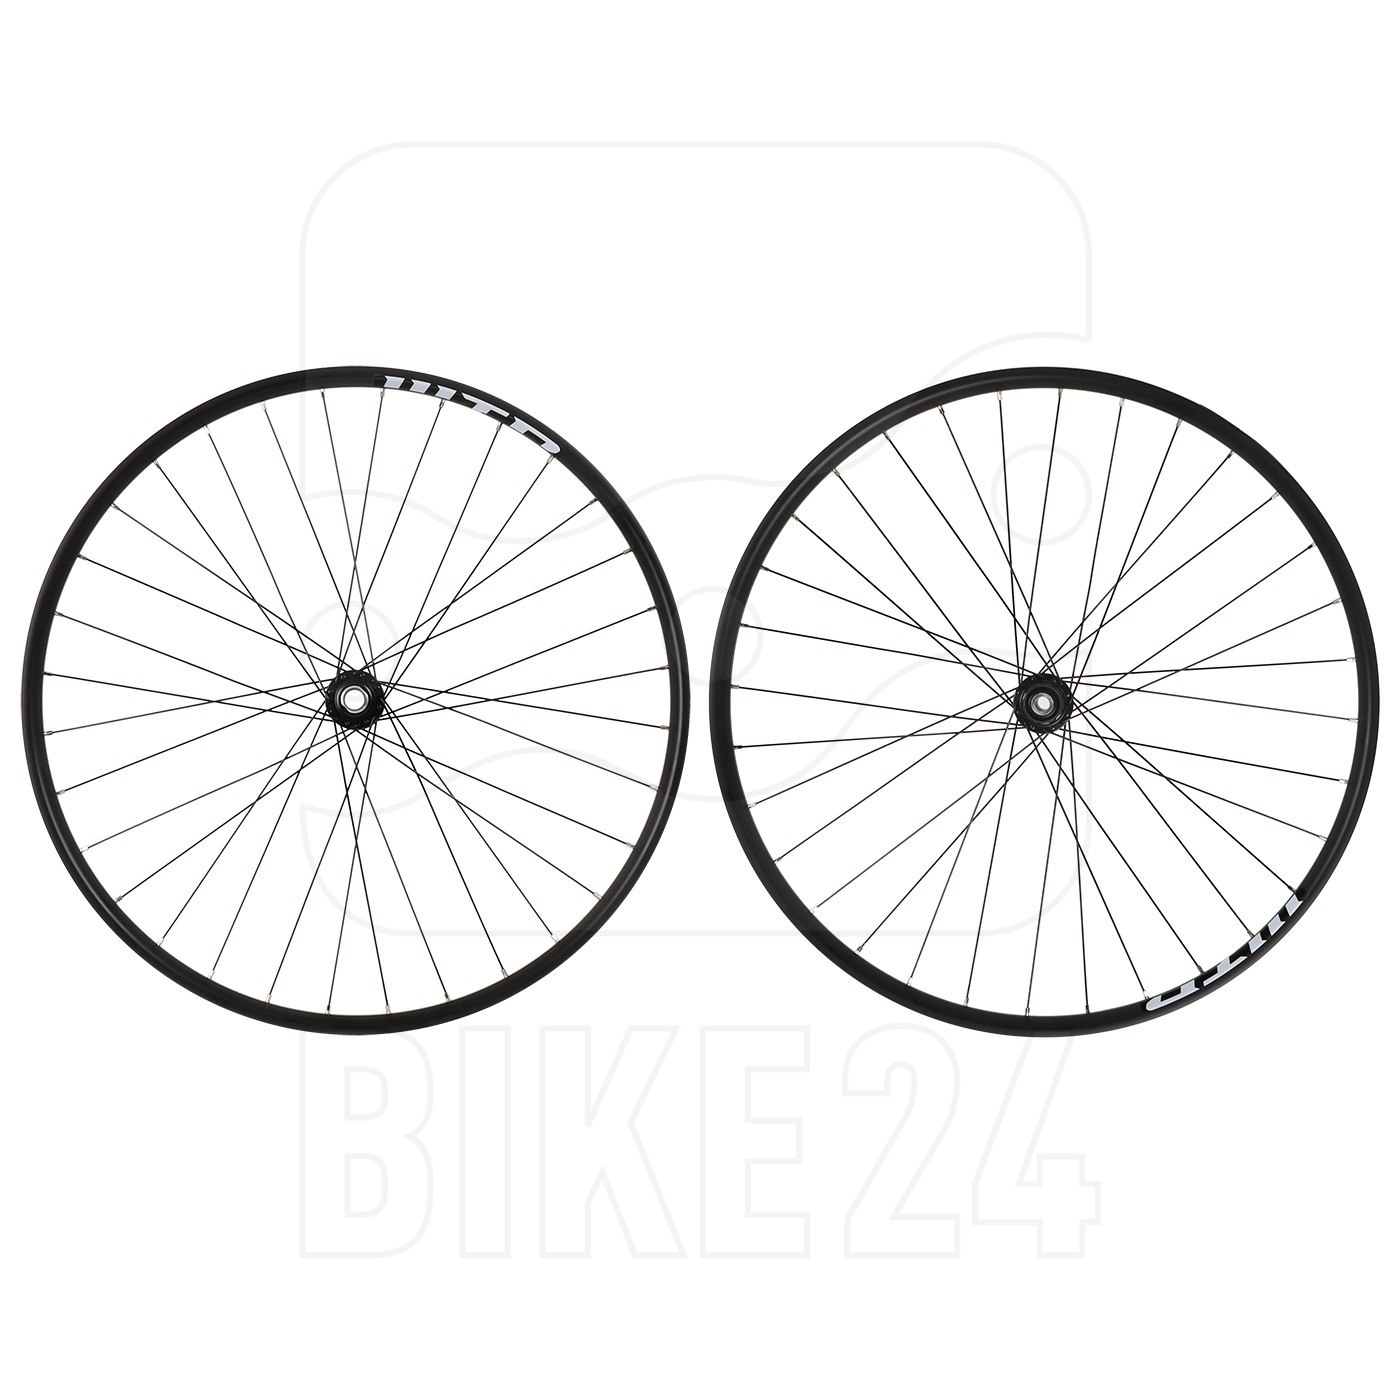 Picture of Shimano | WTB - Deore XT M8010 | ST i25 - 27.5 Inch Wheelset - Centerlock - 15x100mm / 12x142mm